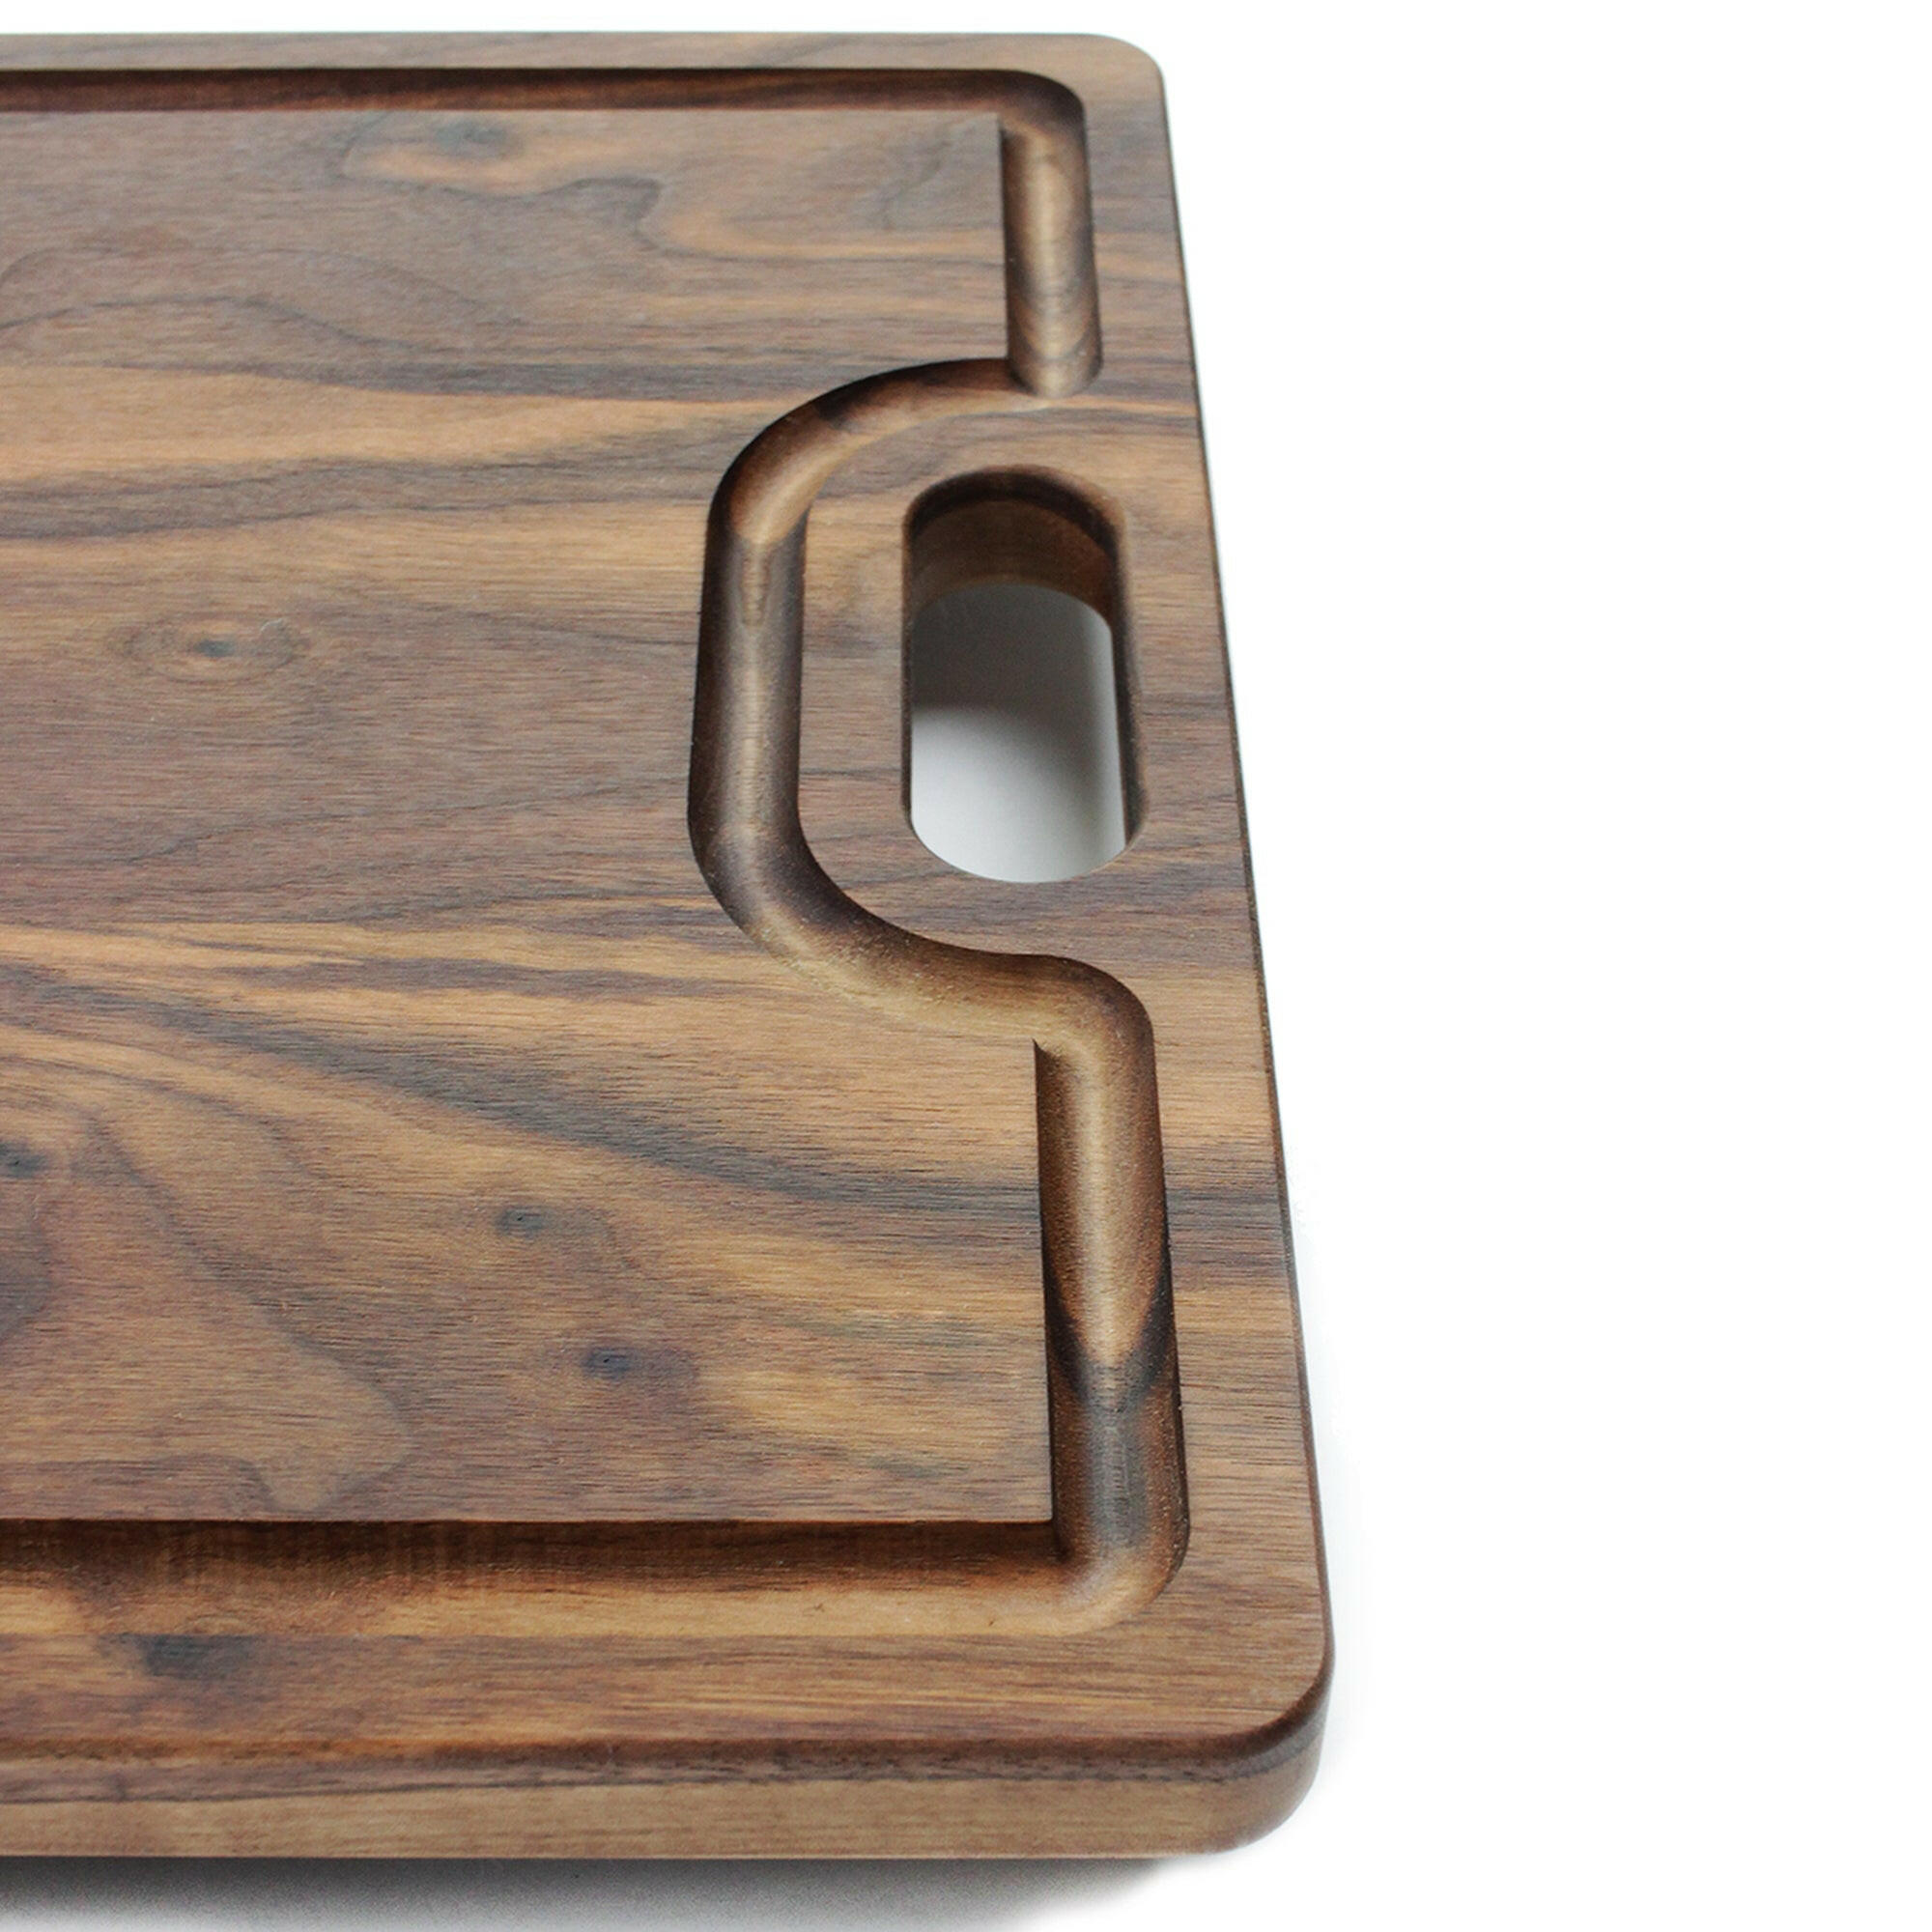 Large Wood Cutting Board With Juice Groove 18x12 Inches, Wood